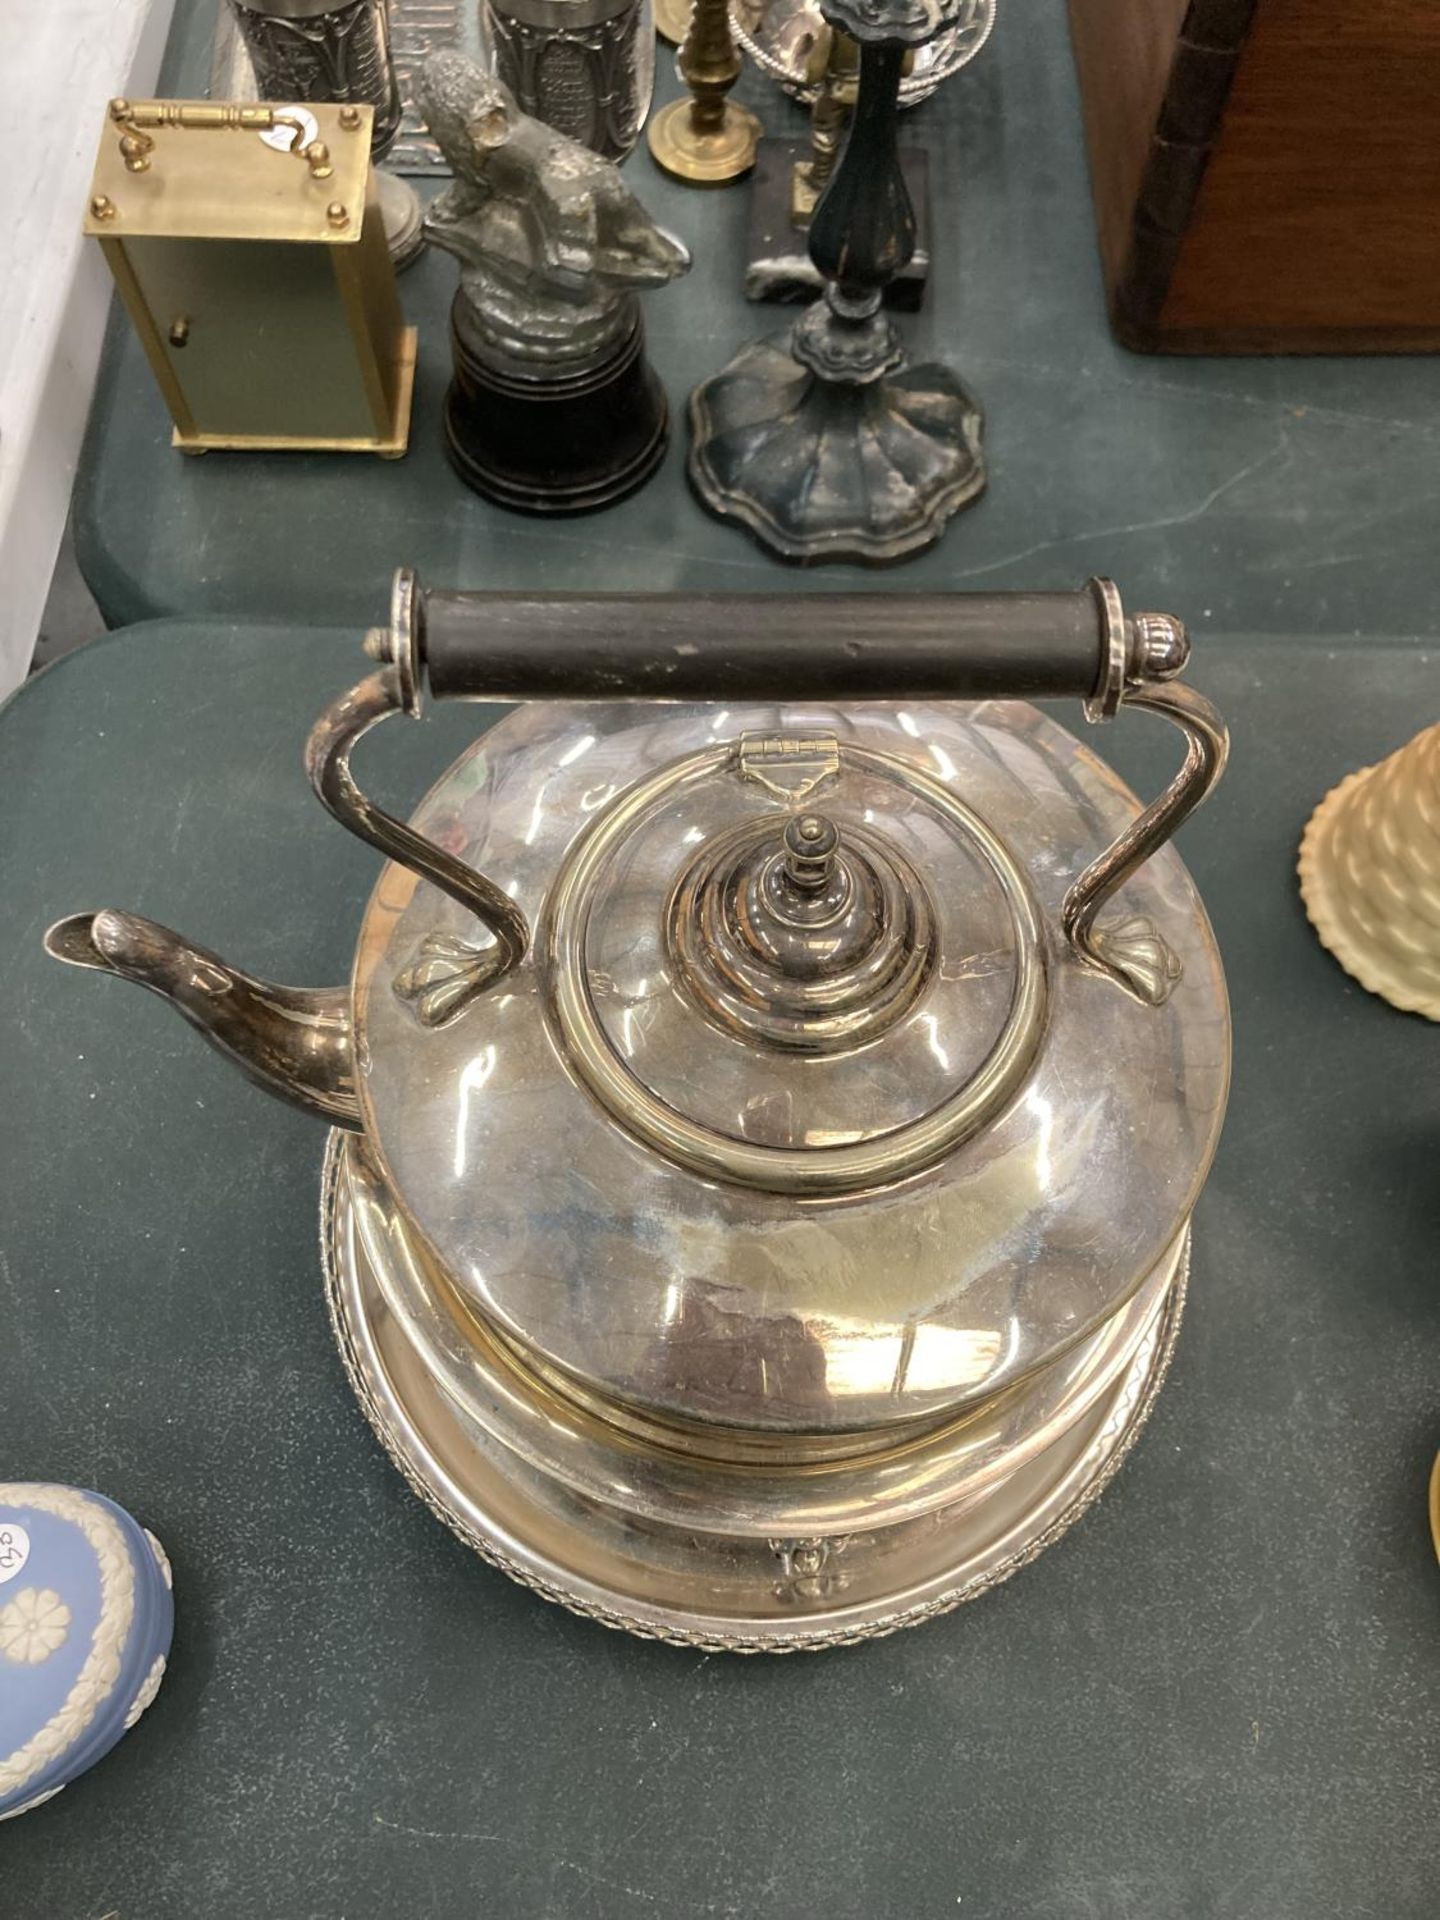 A SILVER PLATED SPIRIT KETTLE ON A TRAY - Image 2 of 4